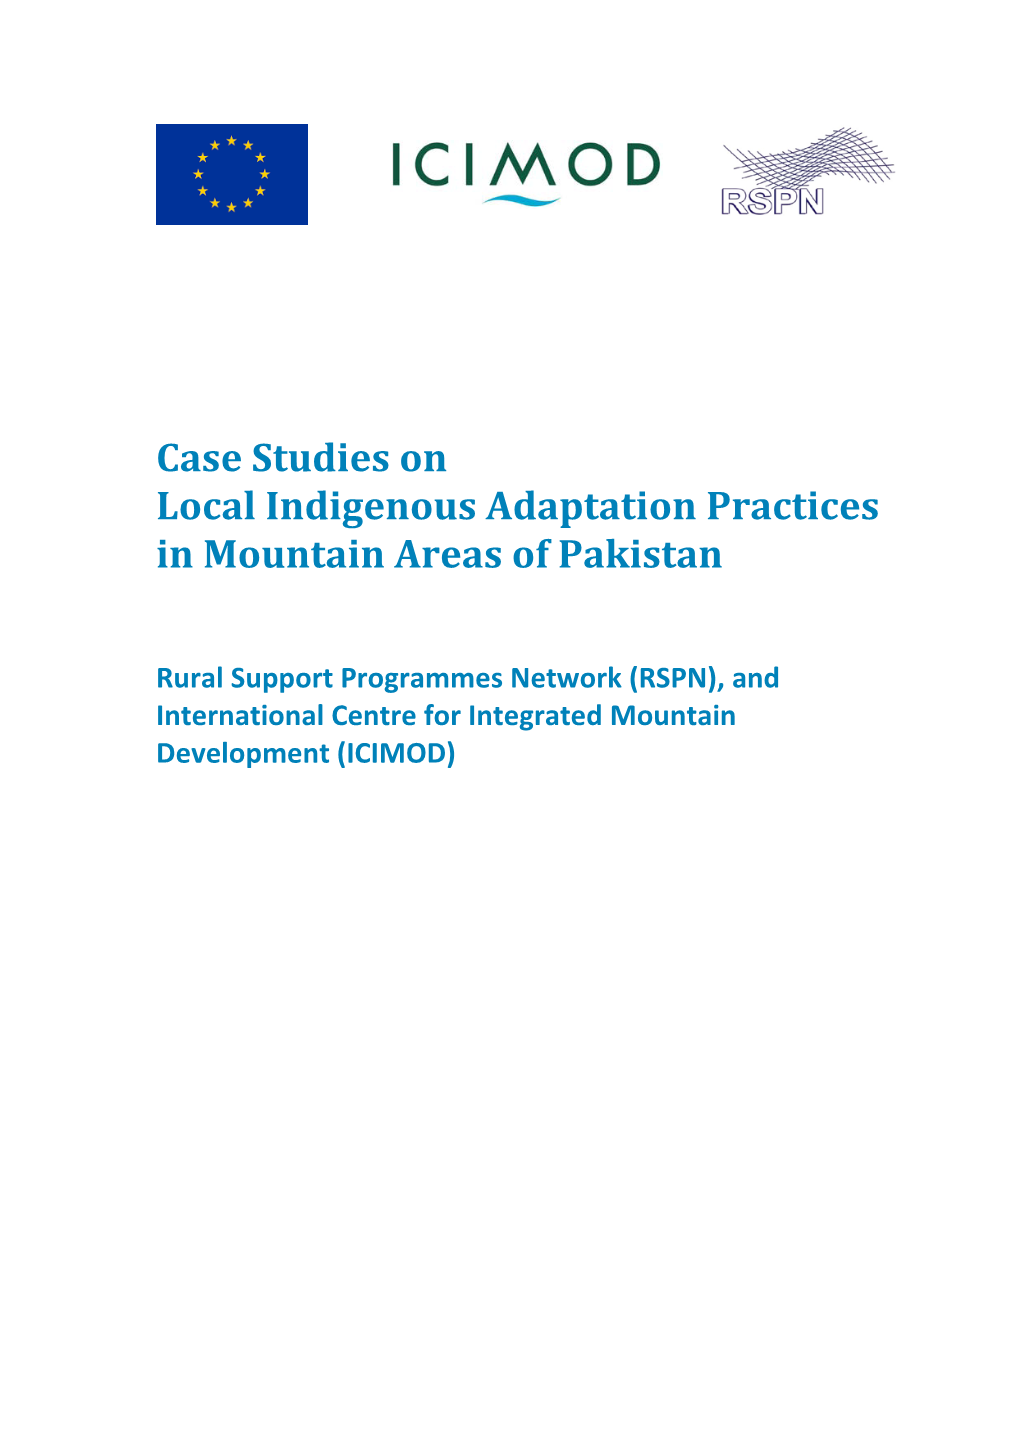 Case Studies on Local Indigenous Adaptation Practices in Mountain Areas of Pakistan